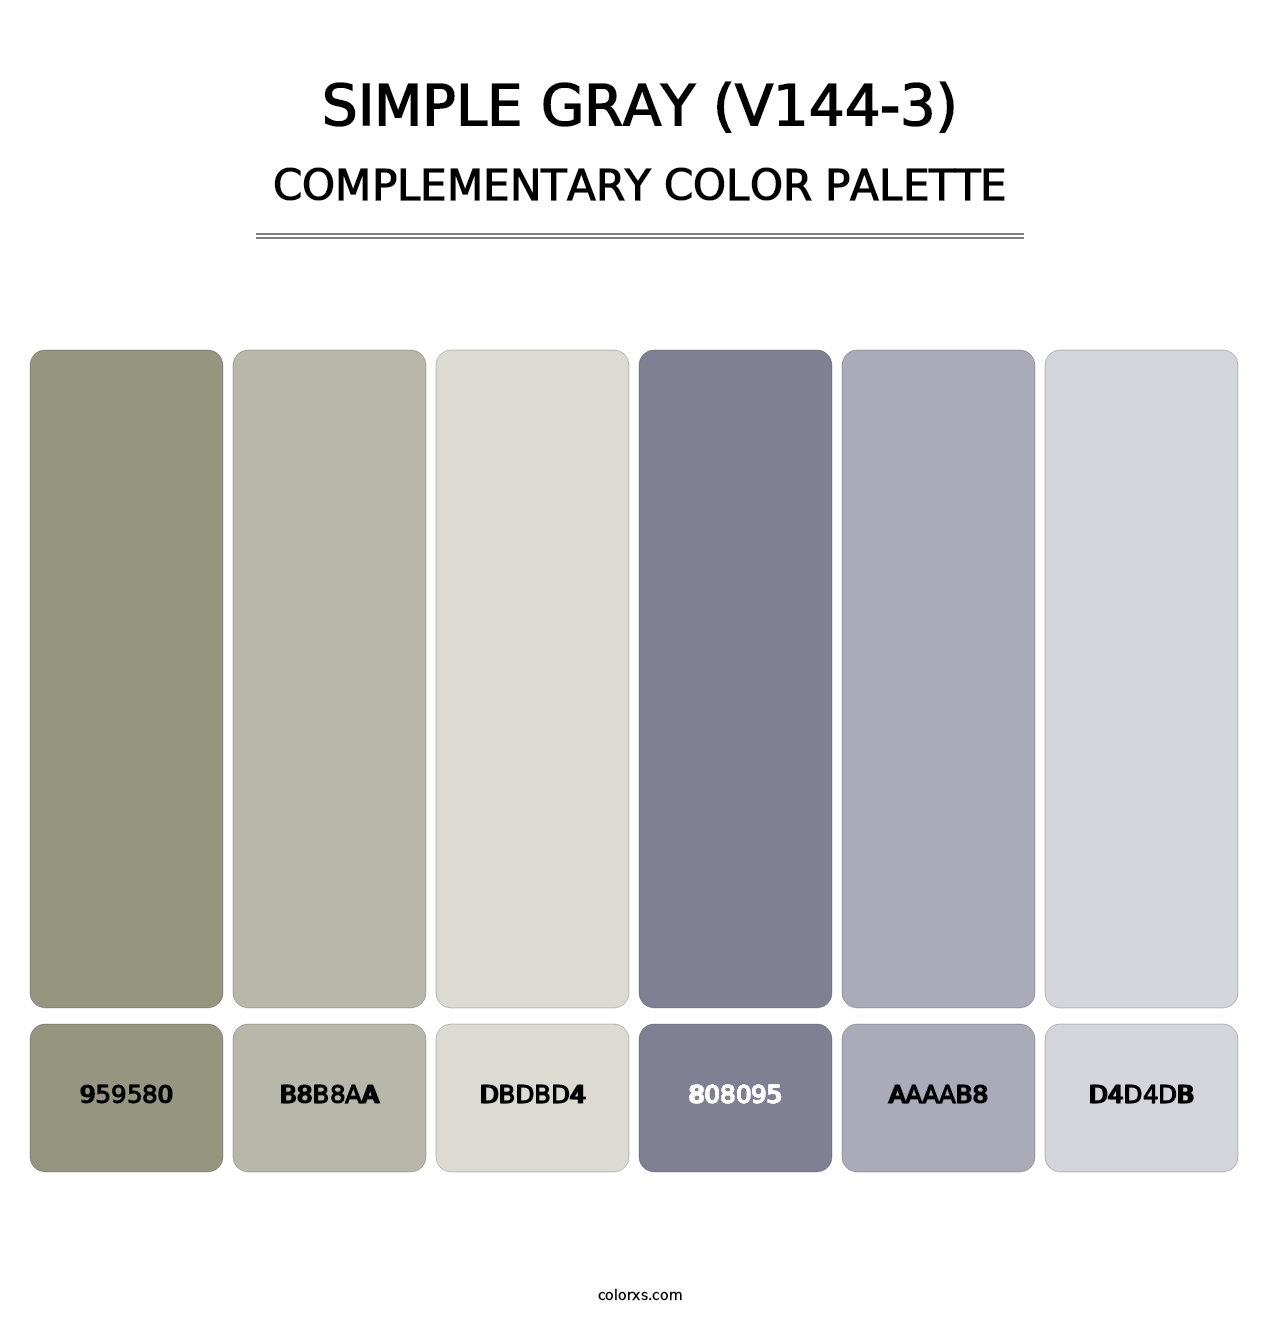 Simple Gray (V144-3) - Complementary Color Palette